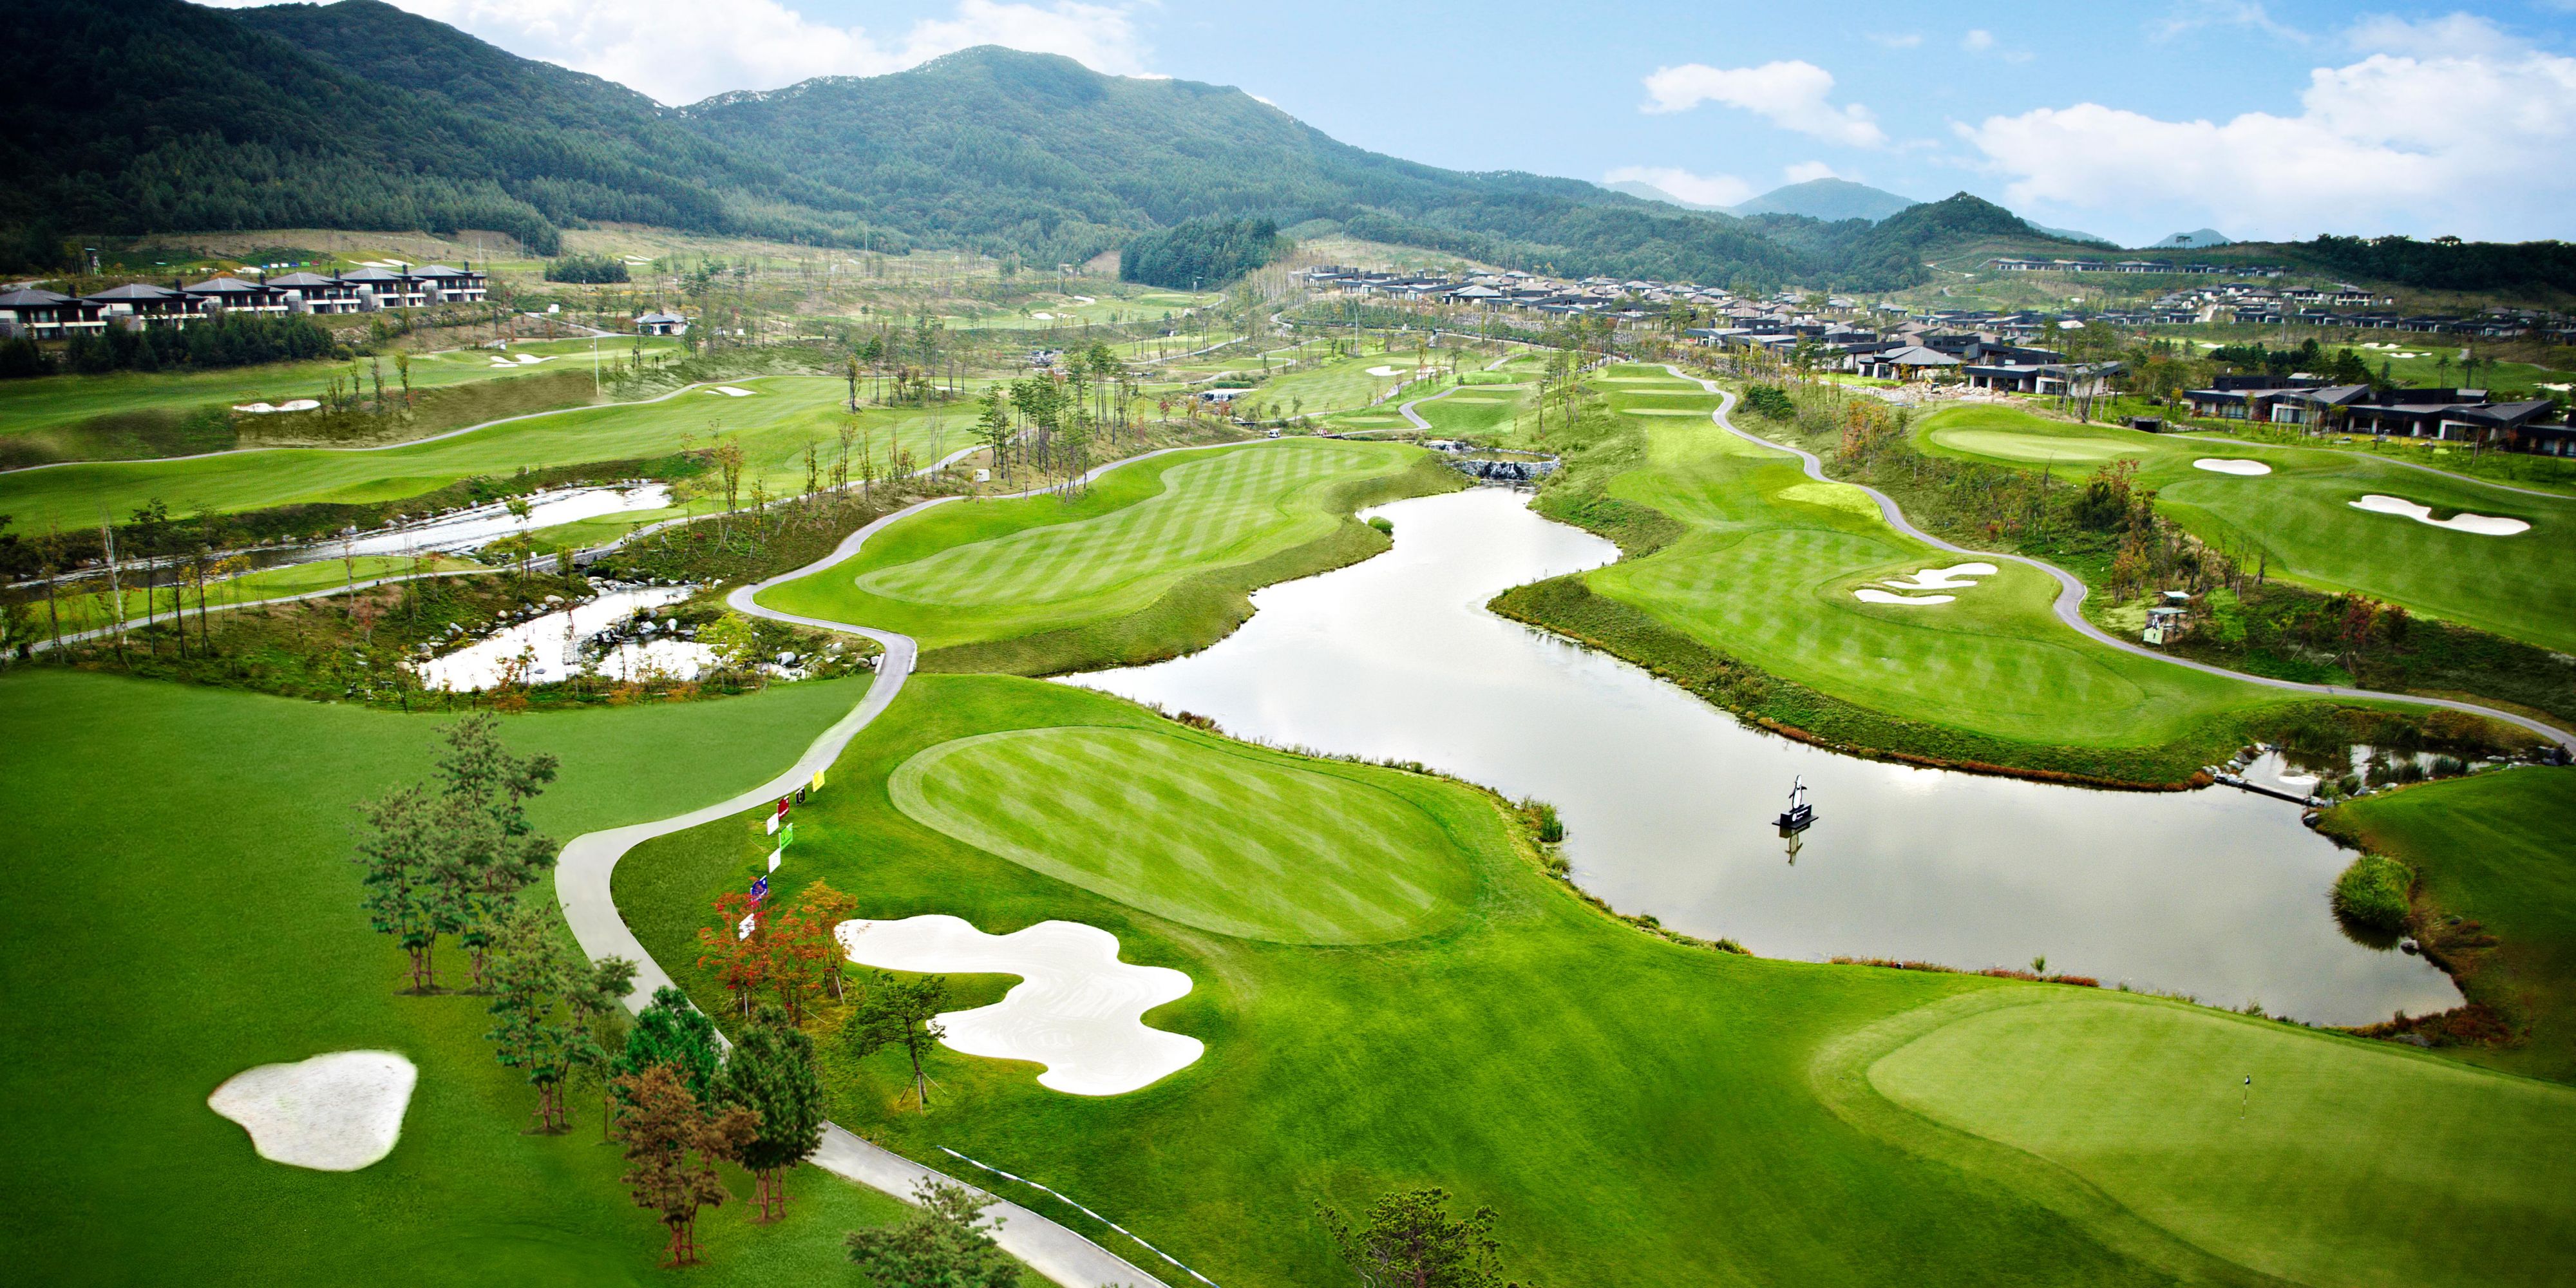 The Alpensia 700 golf course features a picturesque 18-hole course stretched out amidst the natural landscape of Daegwallyeong.